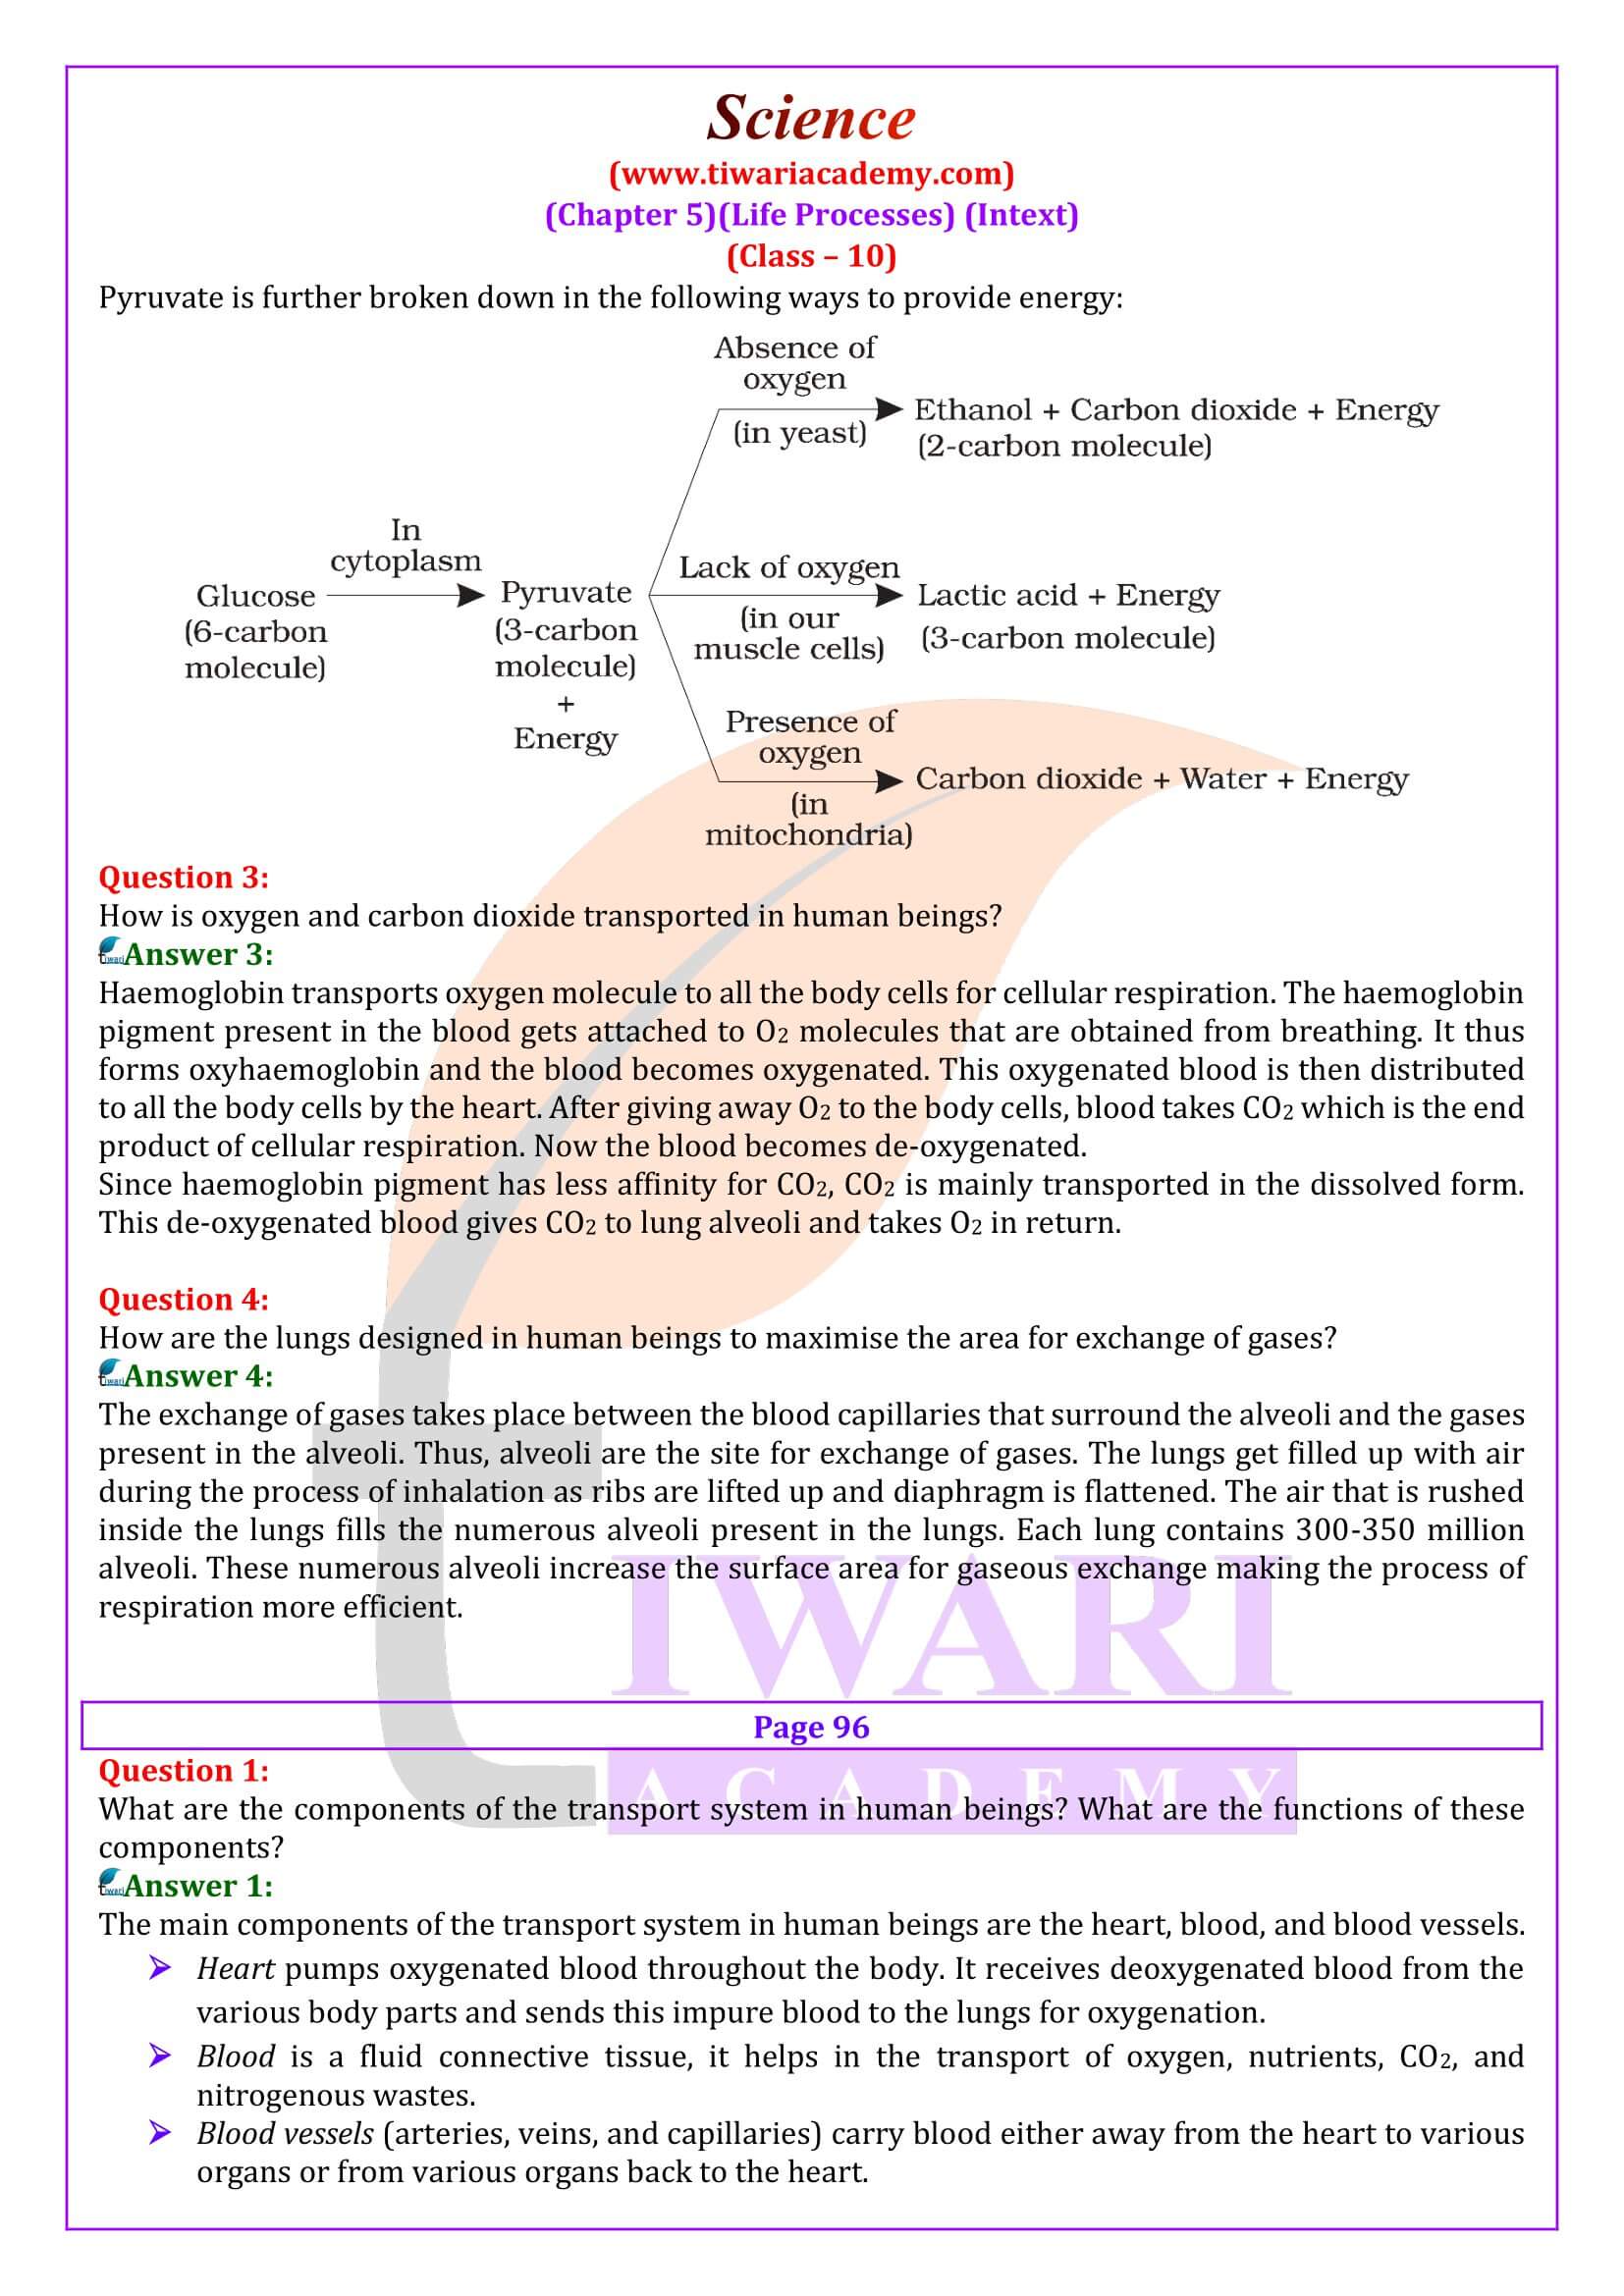 NCERT Solutions for Class 10 Science Chapter 5 in English Medium